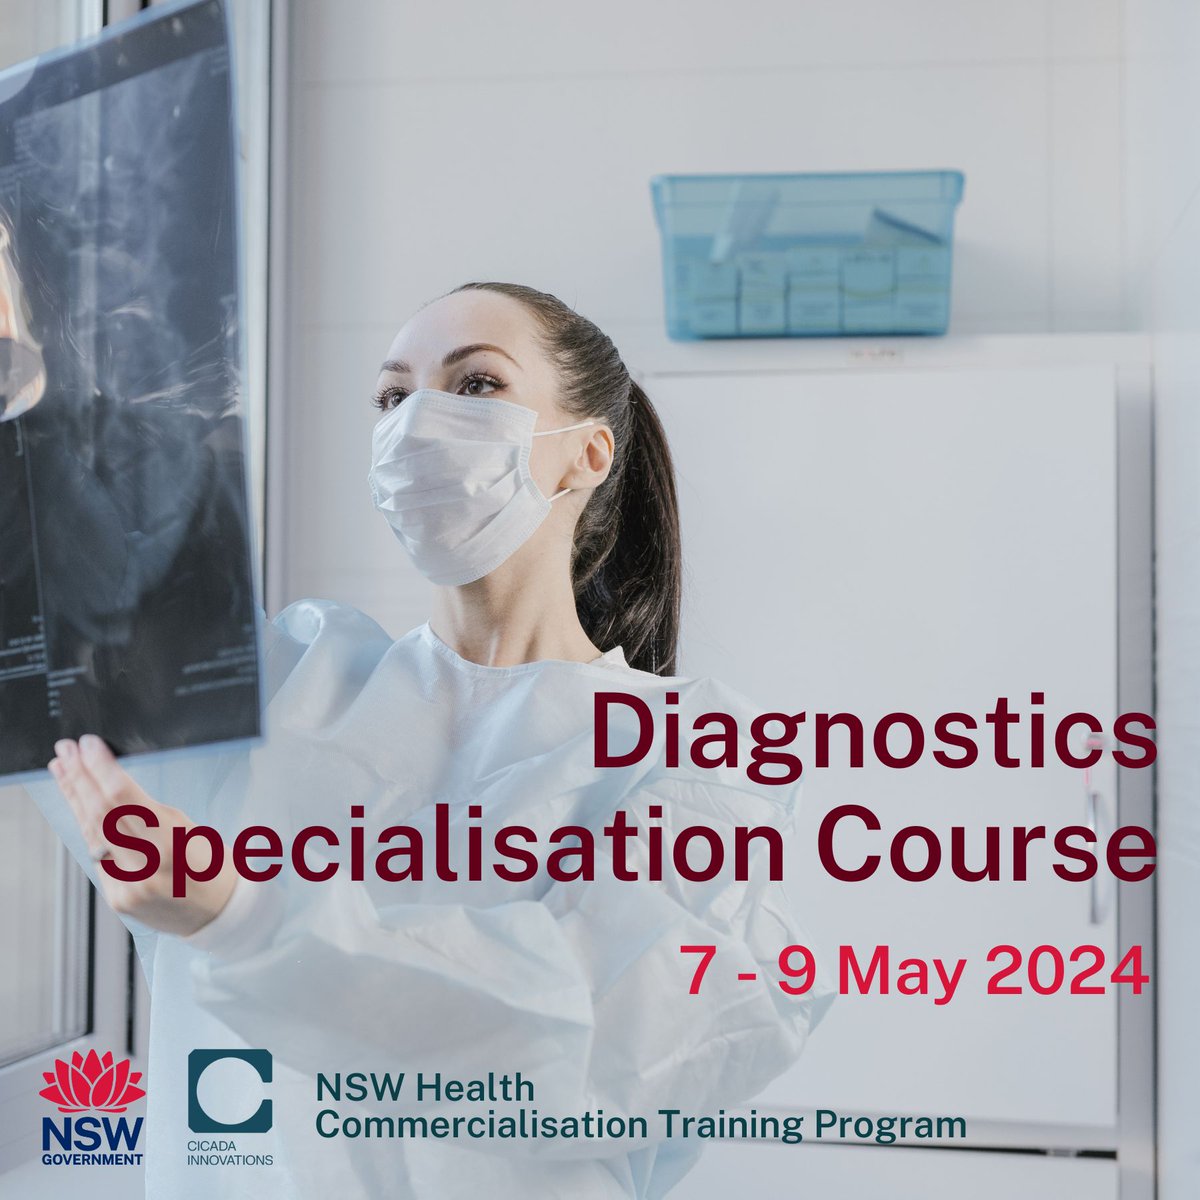 Gain industry-led guidance w/ #Diagnostics specialisation course, part of @NSWHealth Commercialisation Training Program. Delivered in partnership w/ @PathTechnology, Aus' peak industry body representing manufacturers & importers of diagnostics: rb.gy/3uzgy9